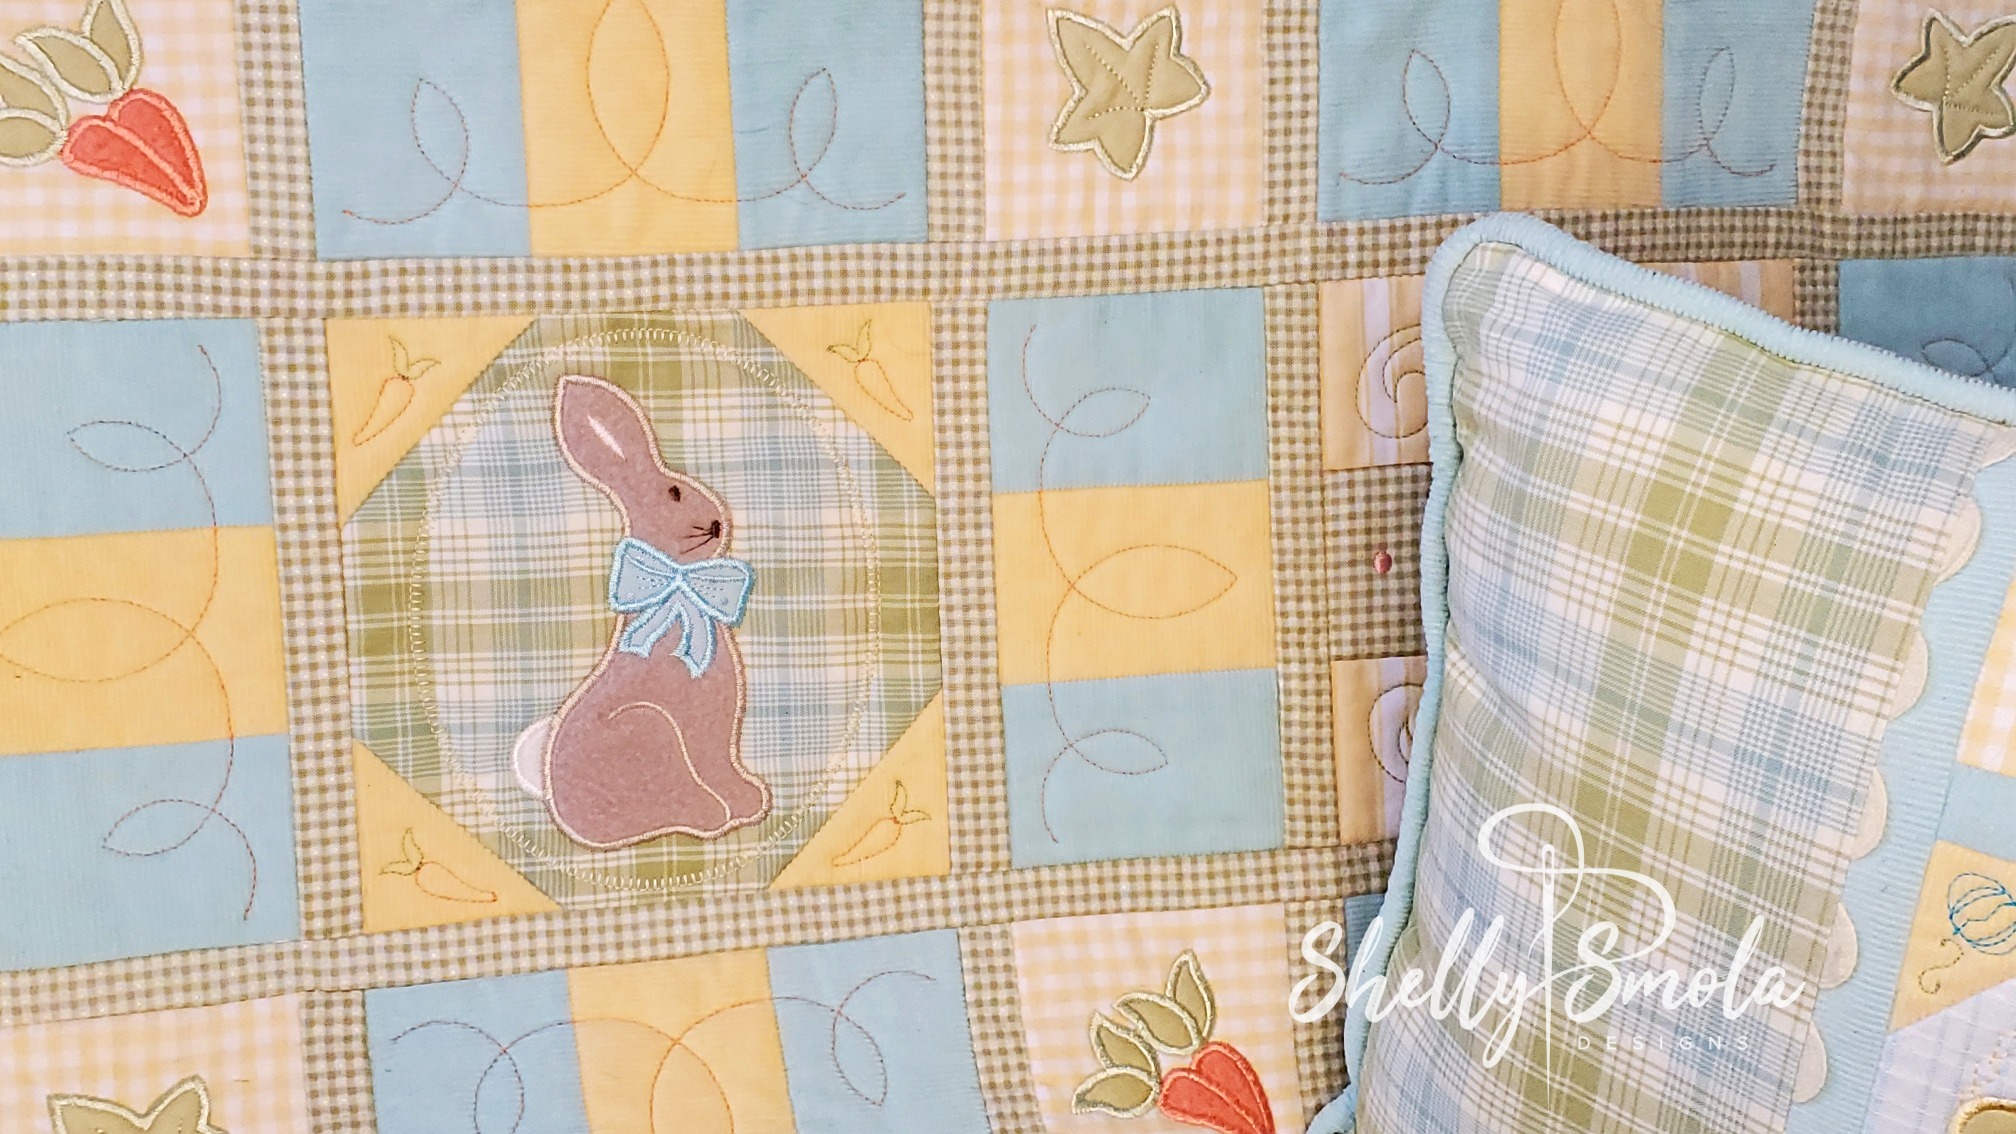 Sweet Spring Quilt by Shelly Smola